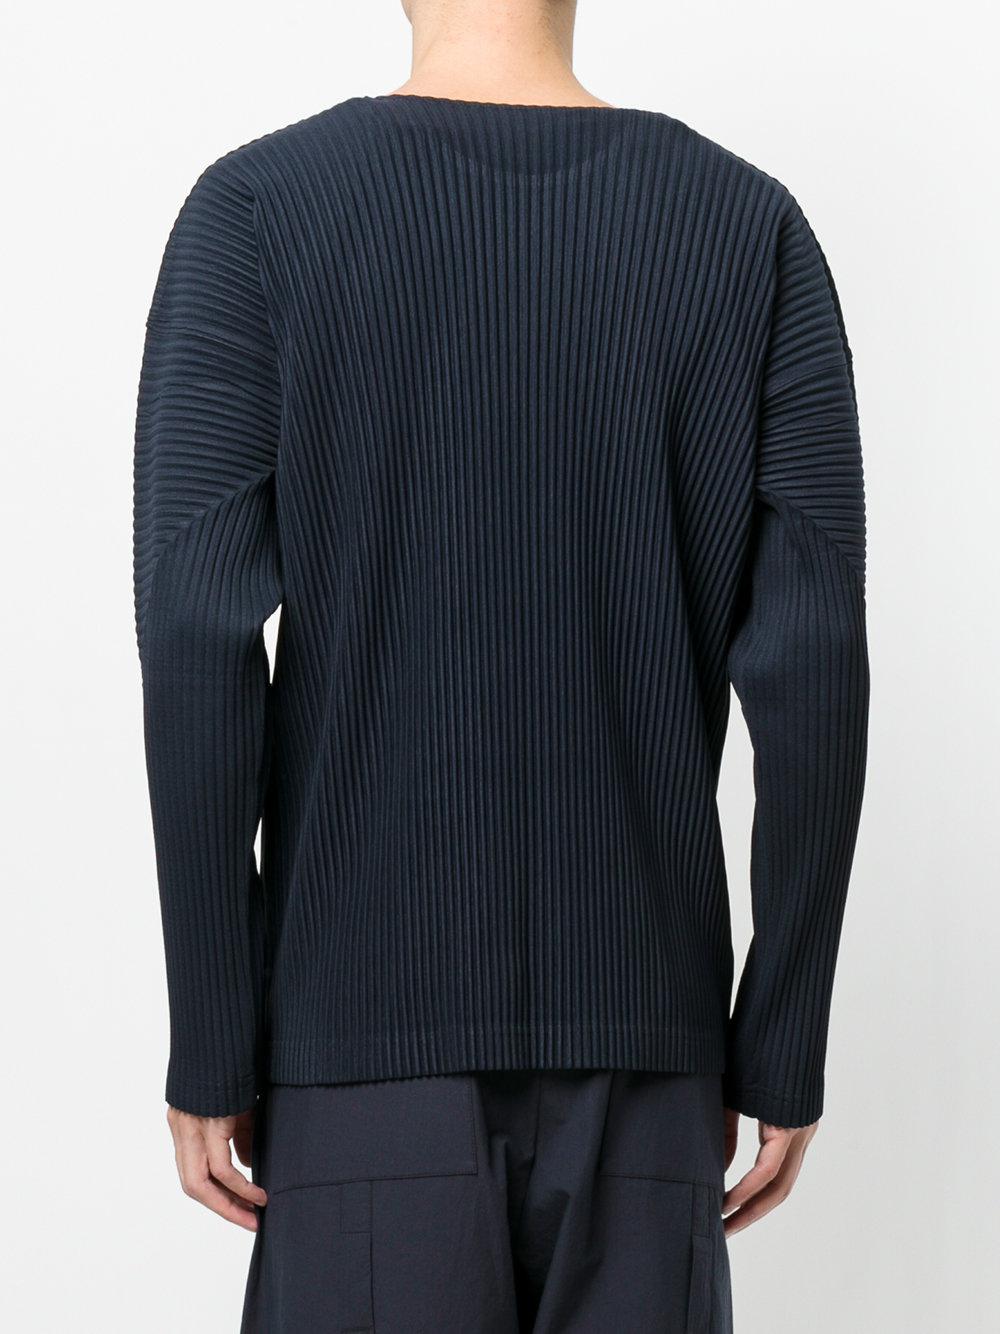 Lyst - Homme Plissé Issey Miyake Round Neck Top in Blue for Men